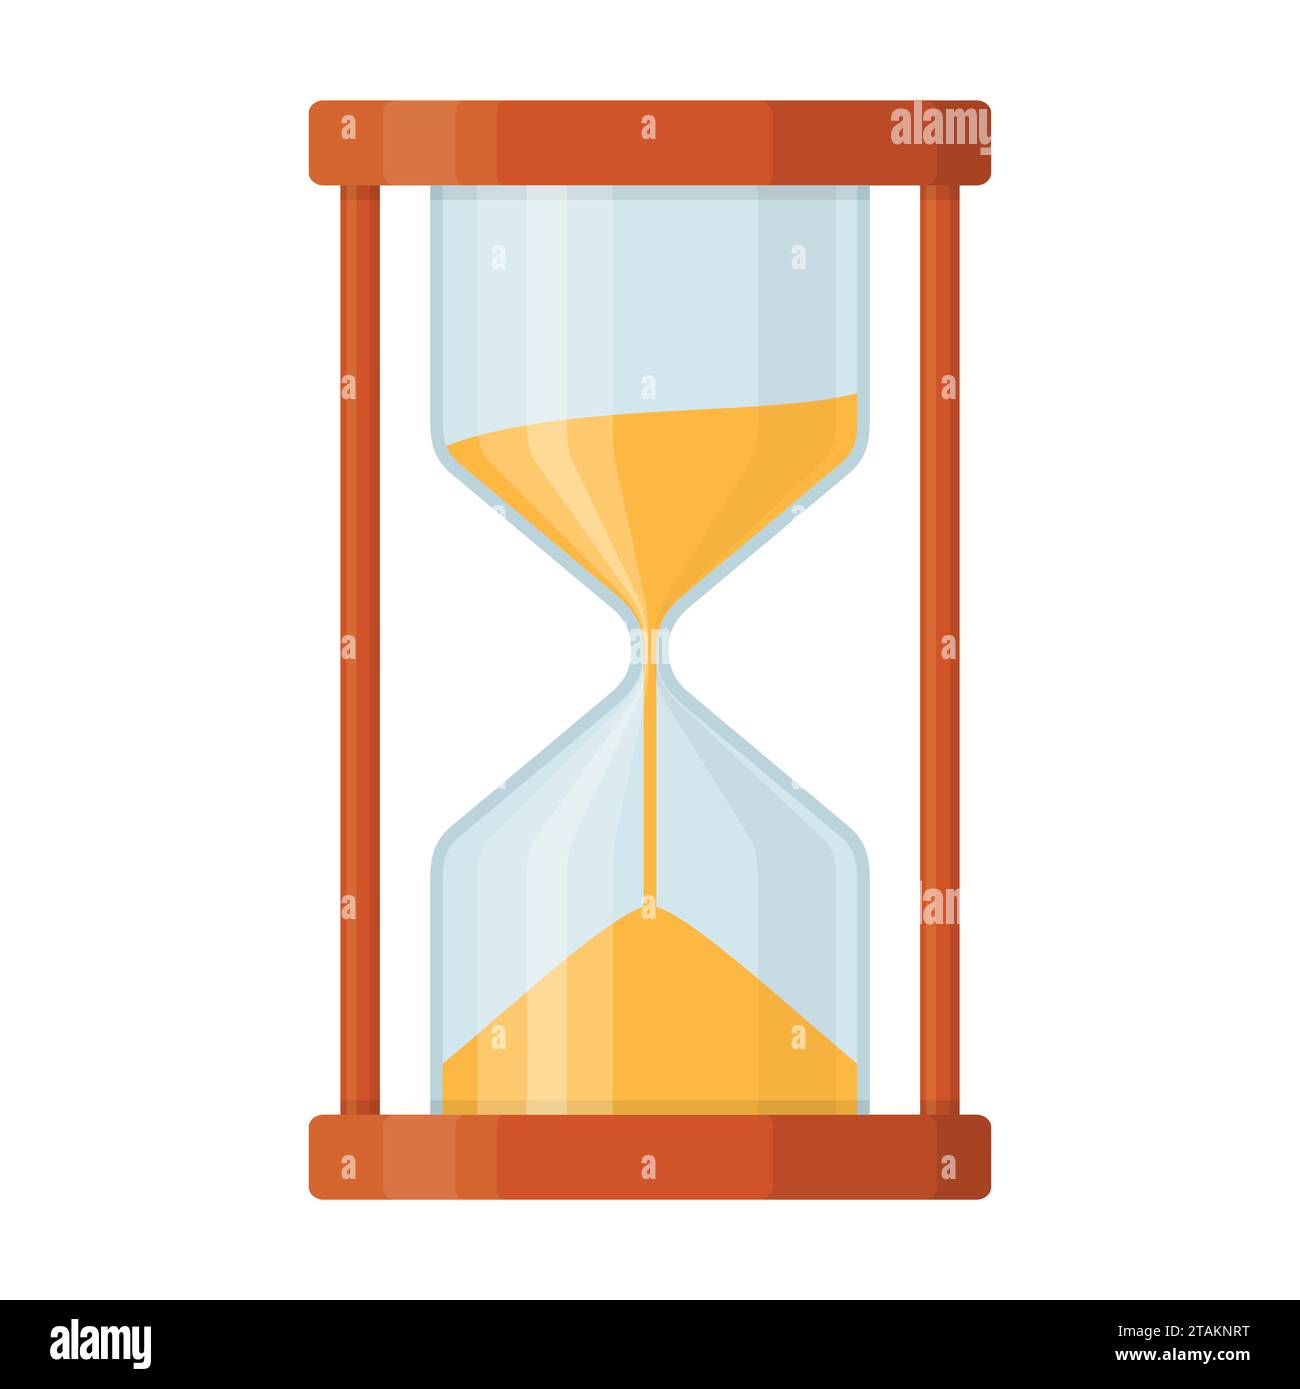 Sandglass icon isolated on white background. Time hourglass in flat style. Sandclock vector illustartion. Stock Vector